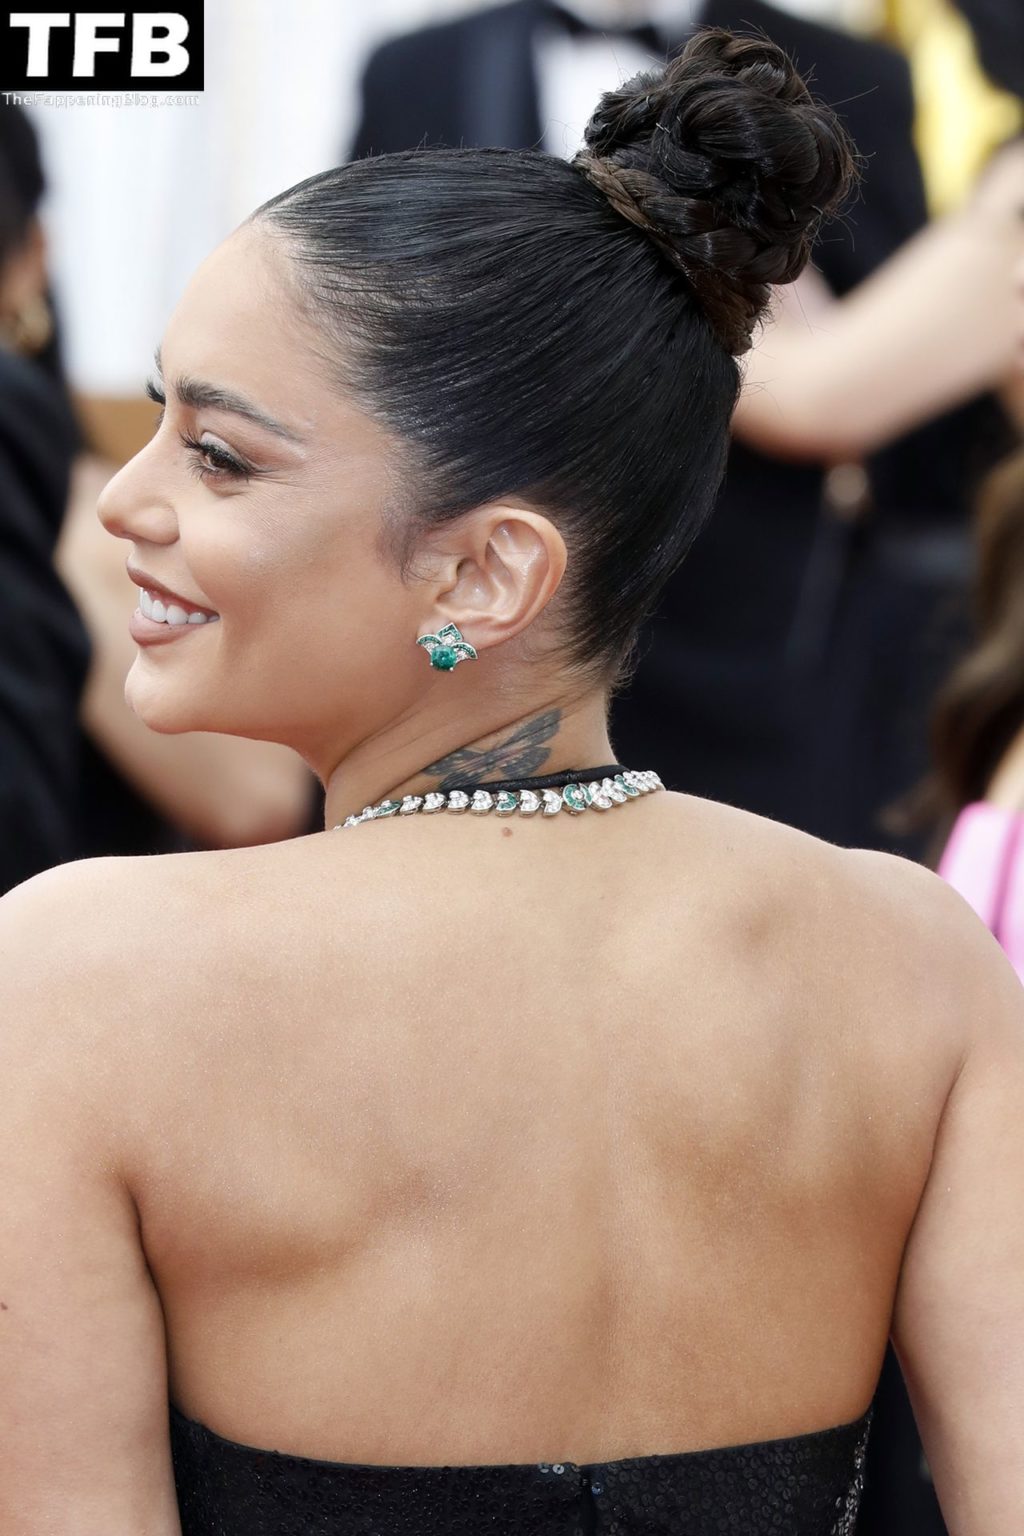 Vanessa Hudgens Sexy The Fappening Blog 74 2 1024x1536 - Vanessa Hudgens Poses on the Red Carpet at the 94th Annual Academy Awards (83 Photos)